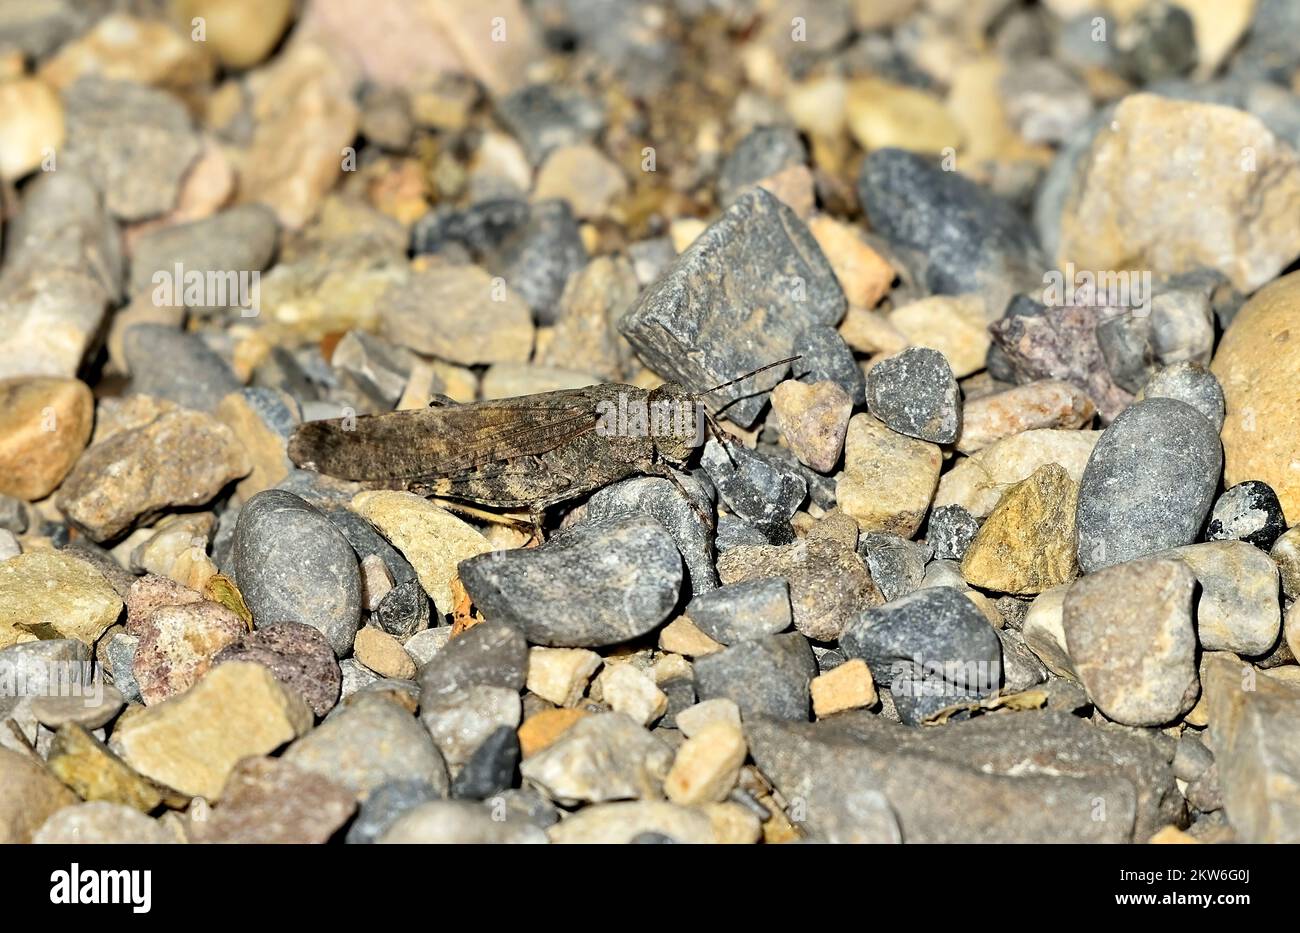 A brown grasshopper hiding in the gravel on a hiking trail in rural Alberta Canada Stock Photo